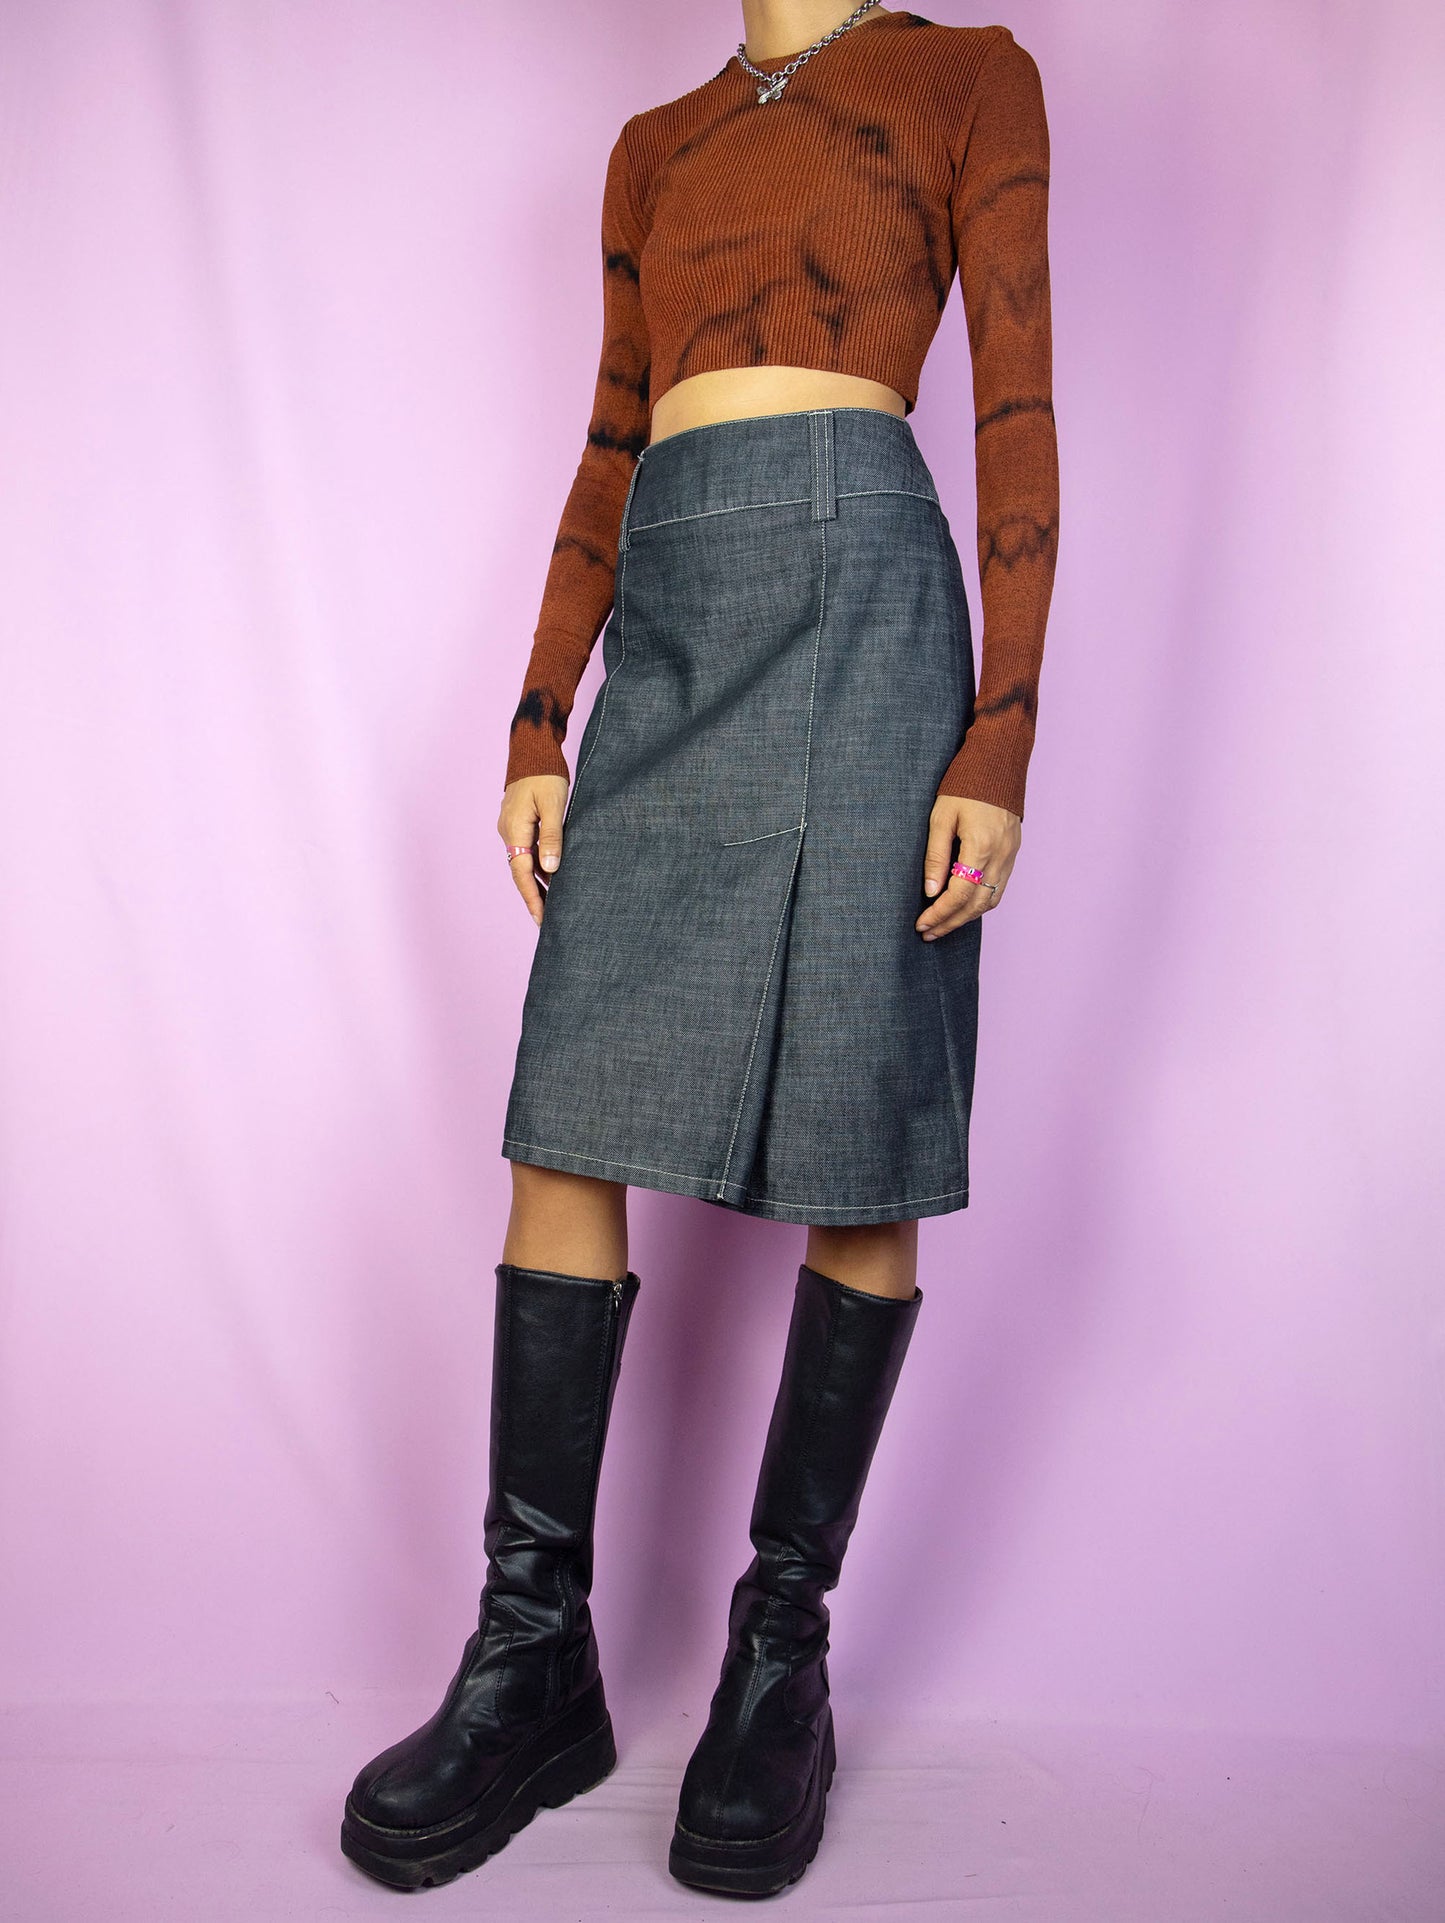 The Y2K Gray Denim Midi Skirt is a vintage skirt with a back zipper closure and front pleat detail. Cyber grunge 2000s subversive skirt.